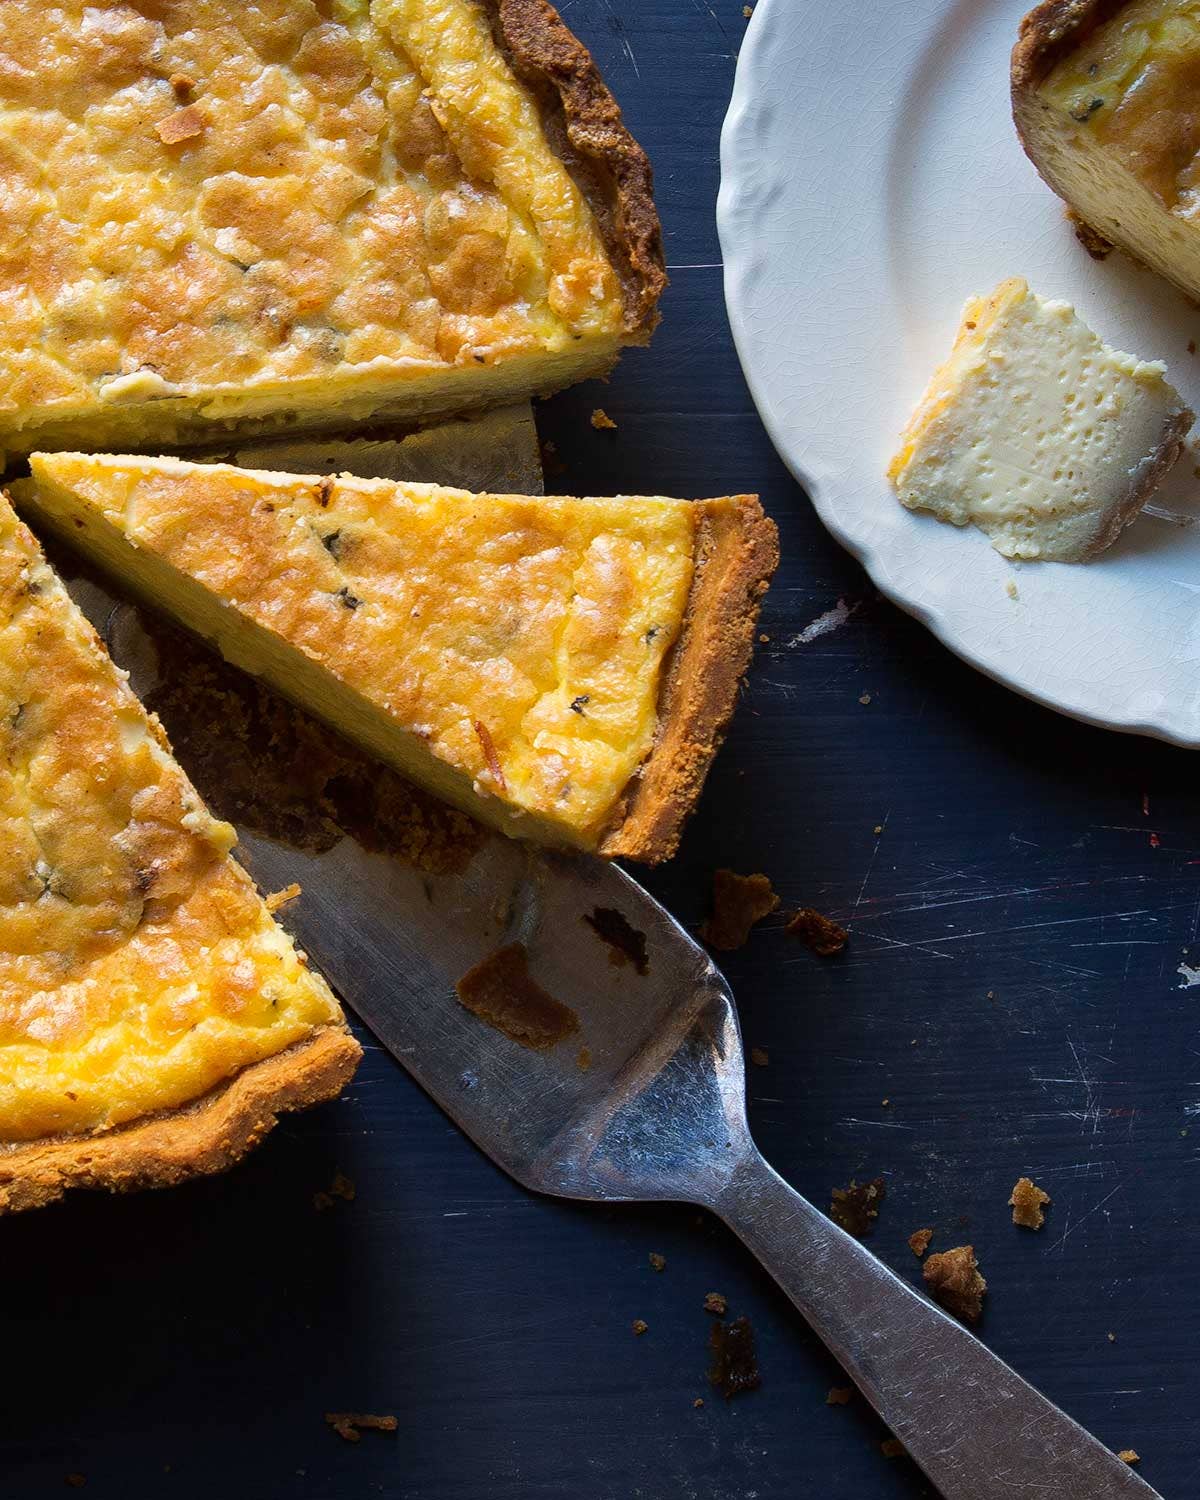 Perfect Blue Cheese Quiche with Whole Grain Crust